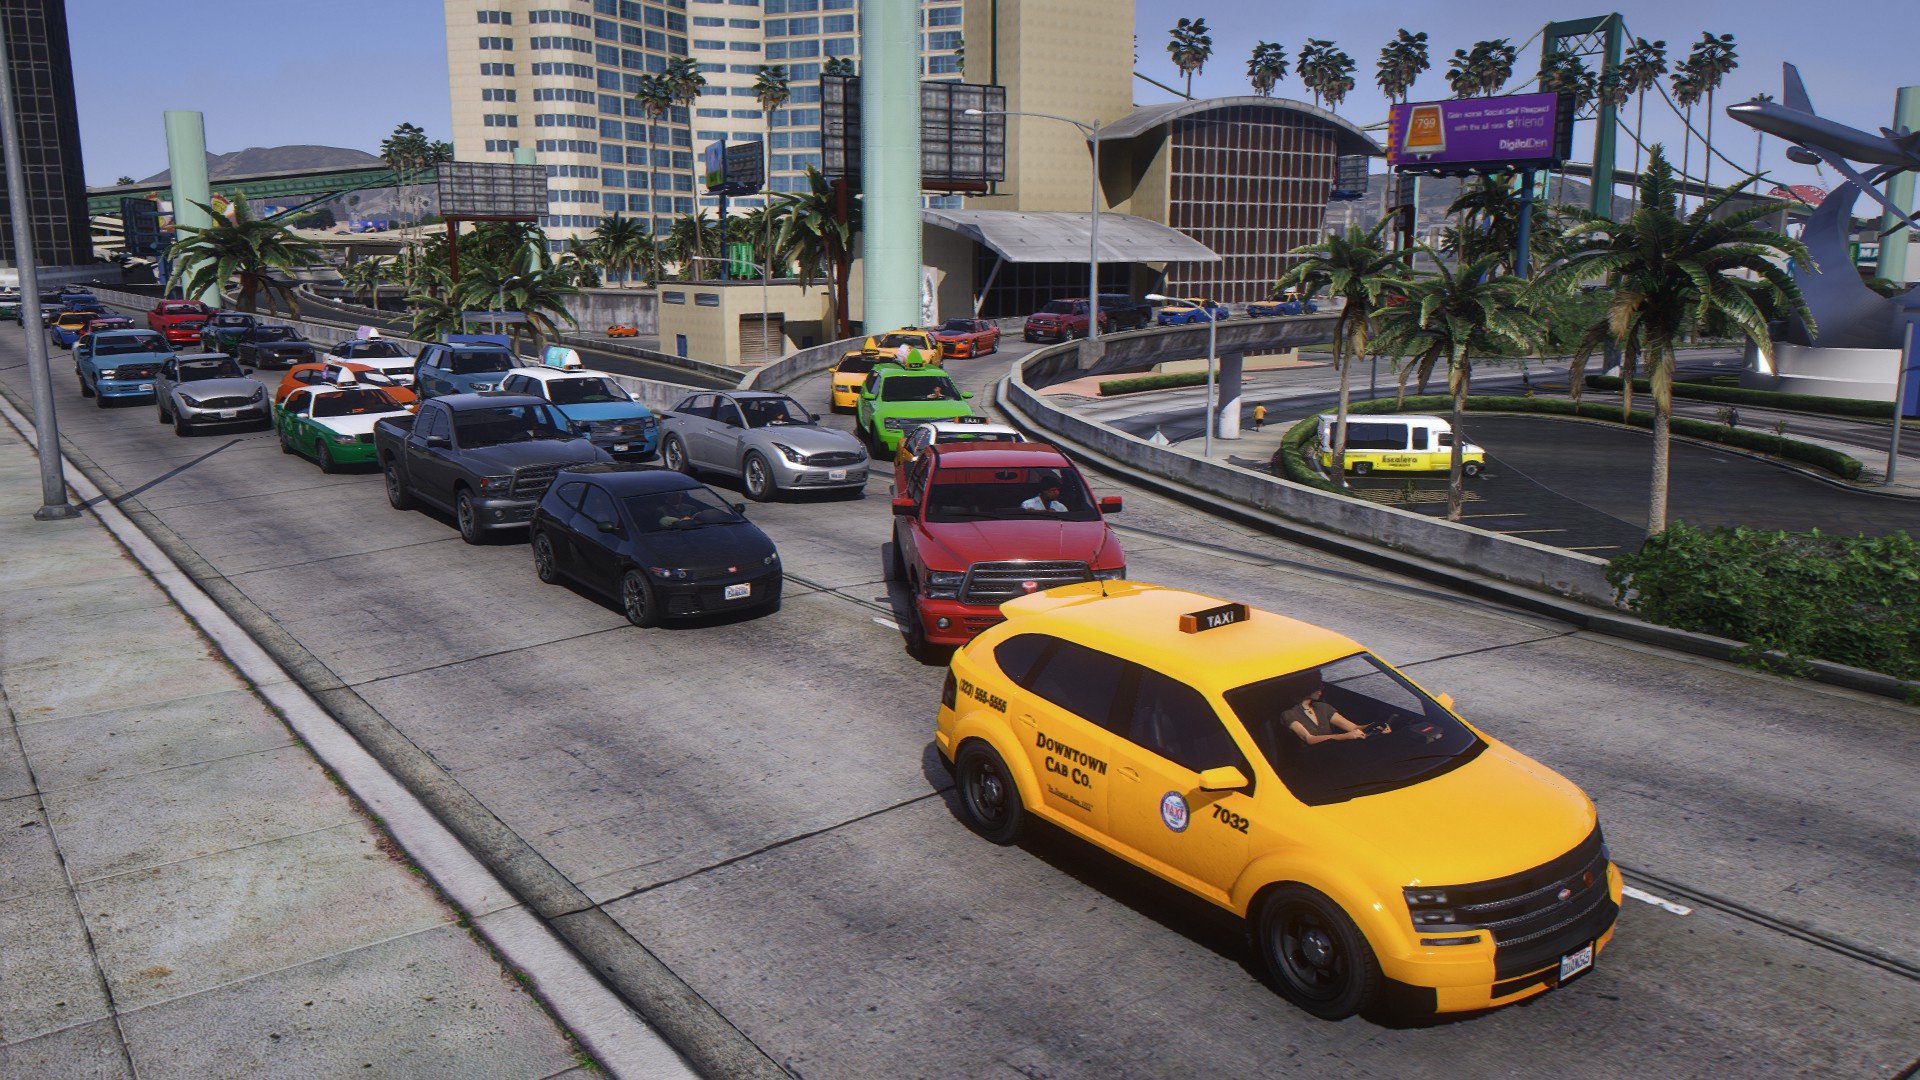 Epic Games offers free GTA V, experiences overwhelming traffic